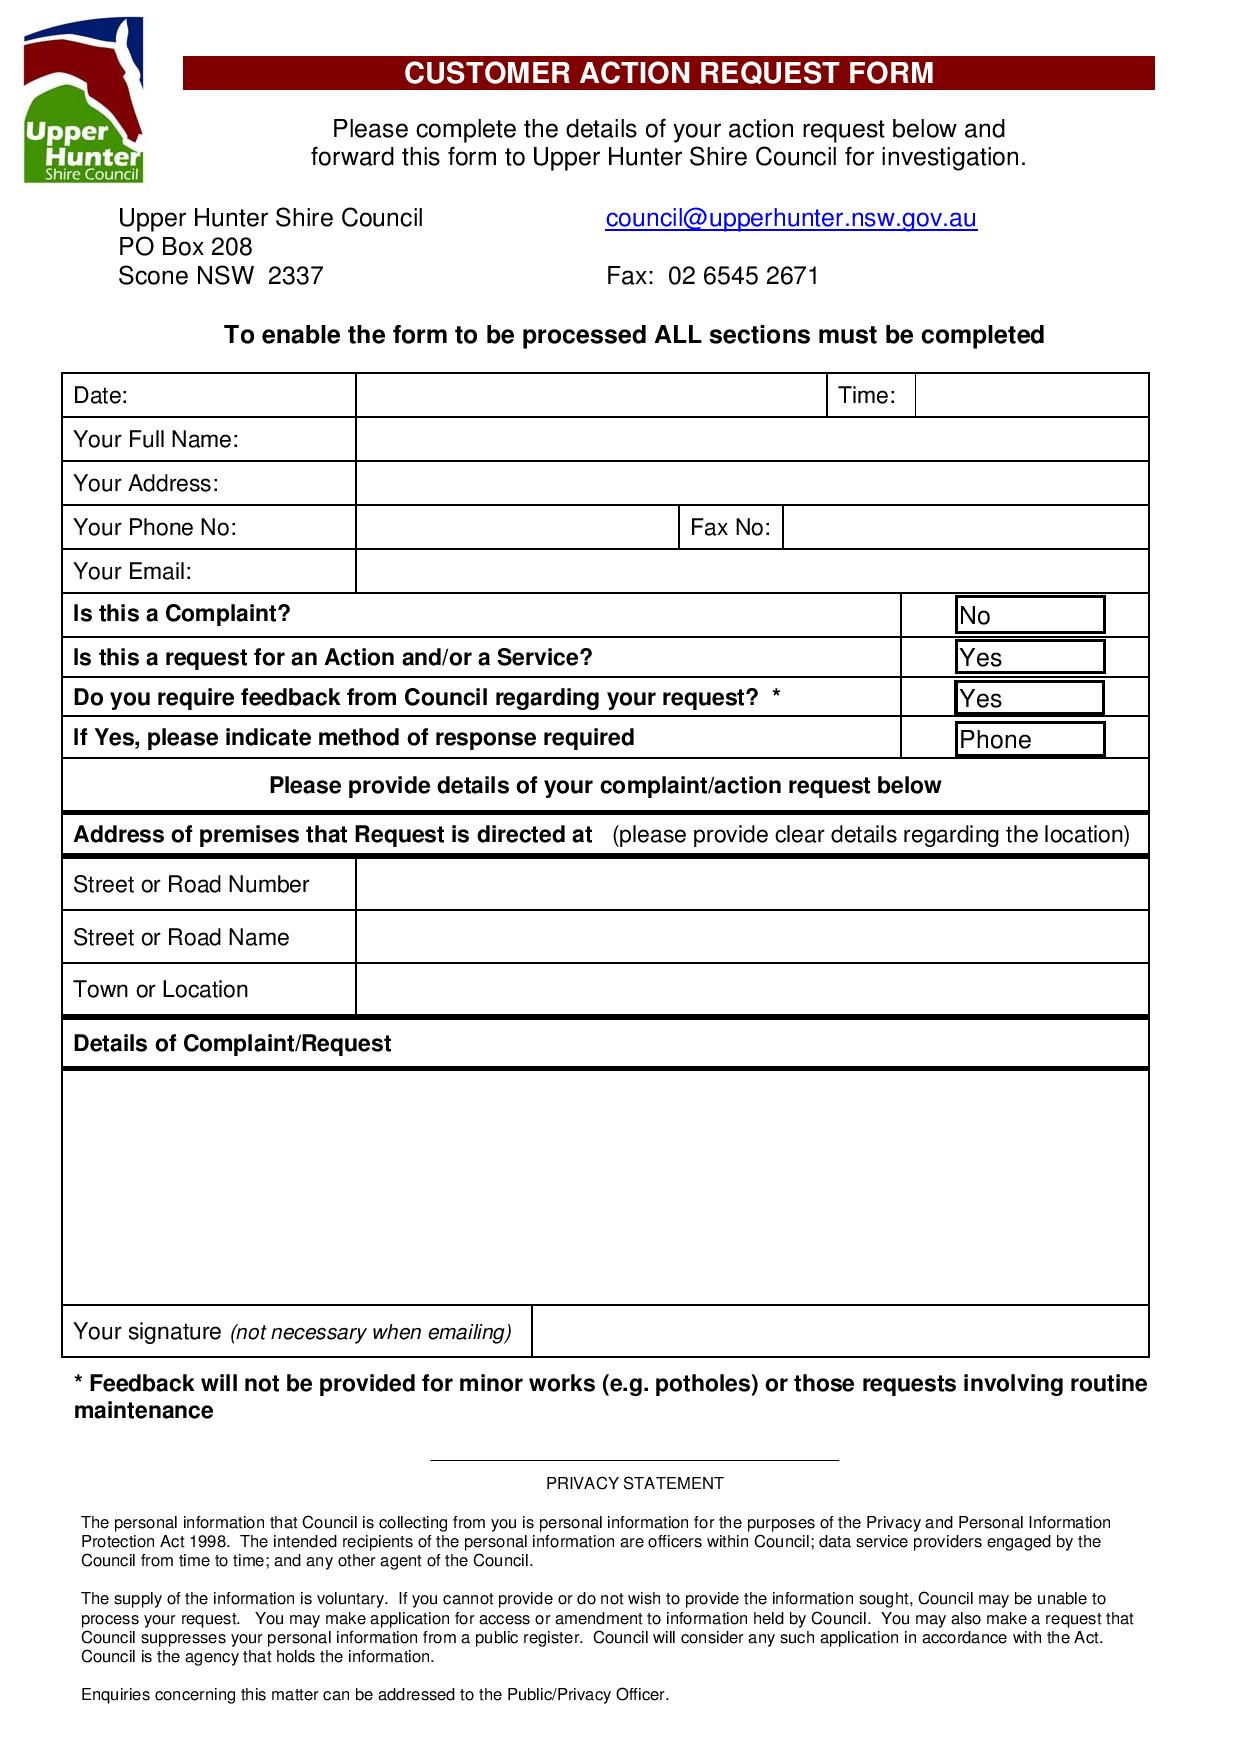 customer action request form page 001